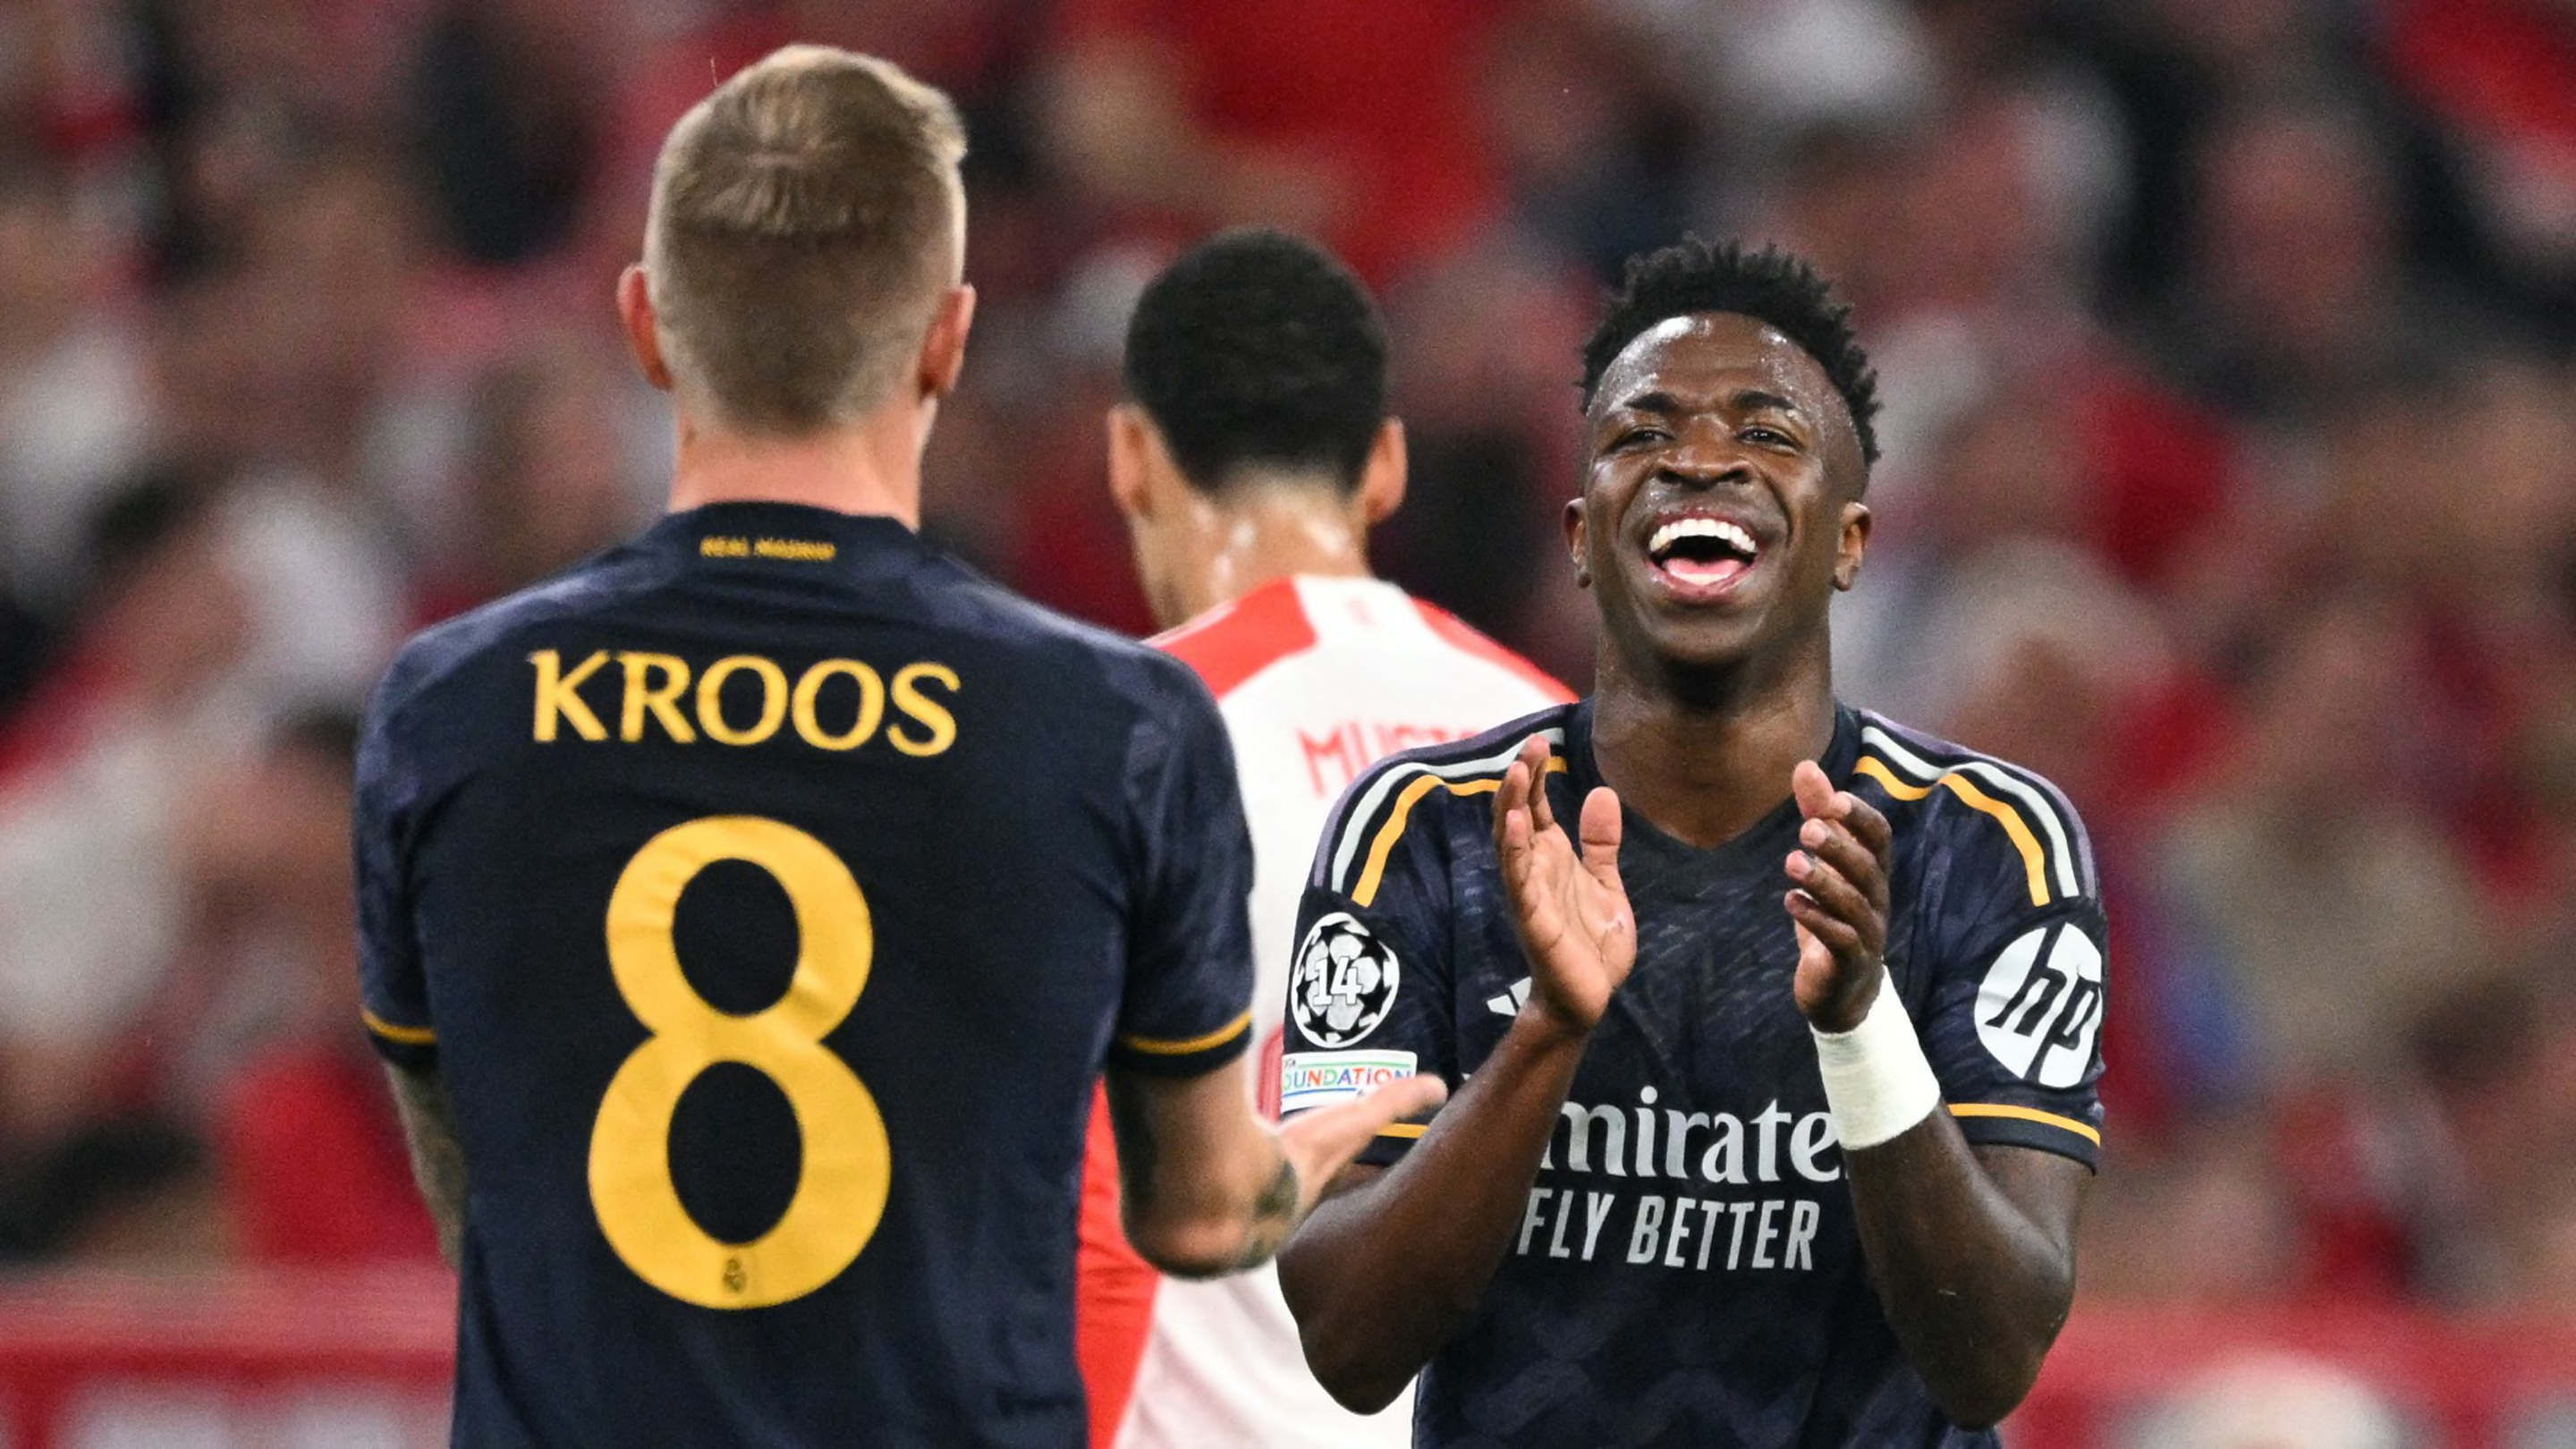 Vinicius Junior explains why it was 'easy' to score against Bayern Munich